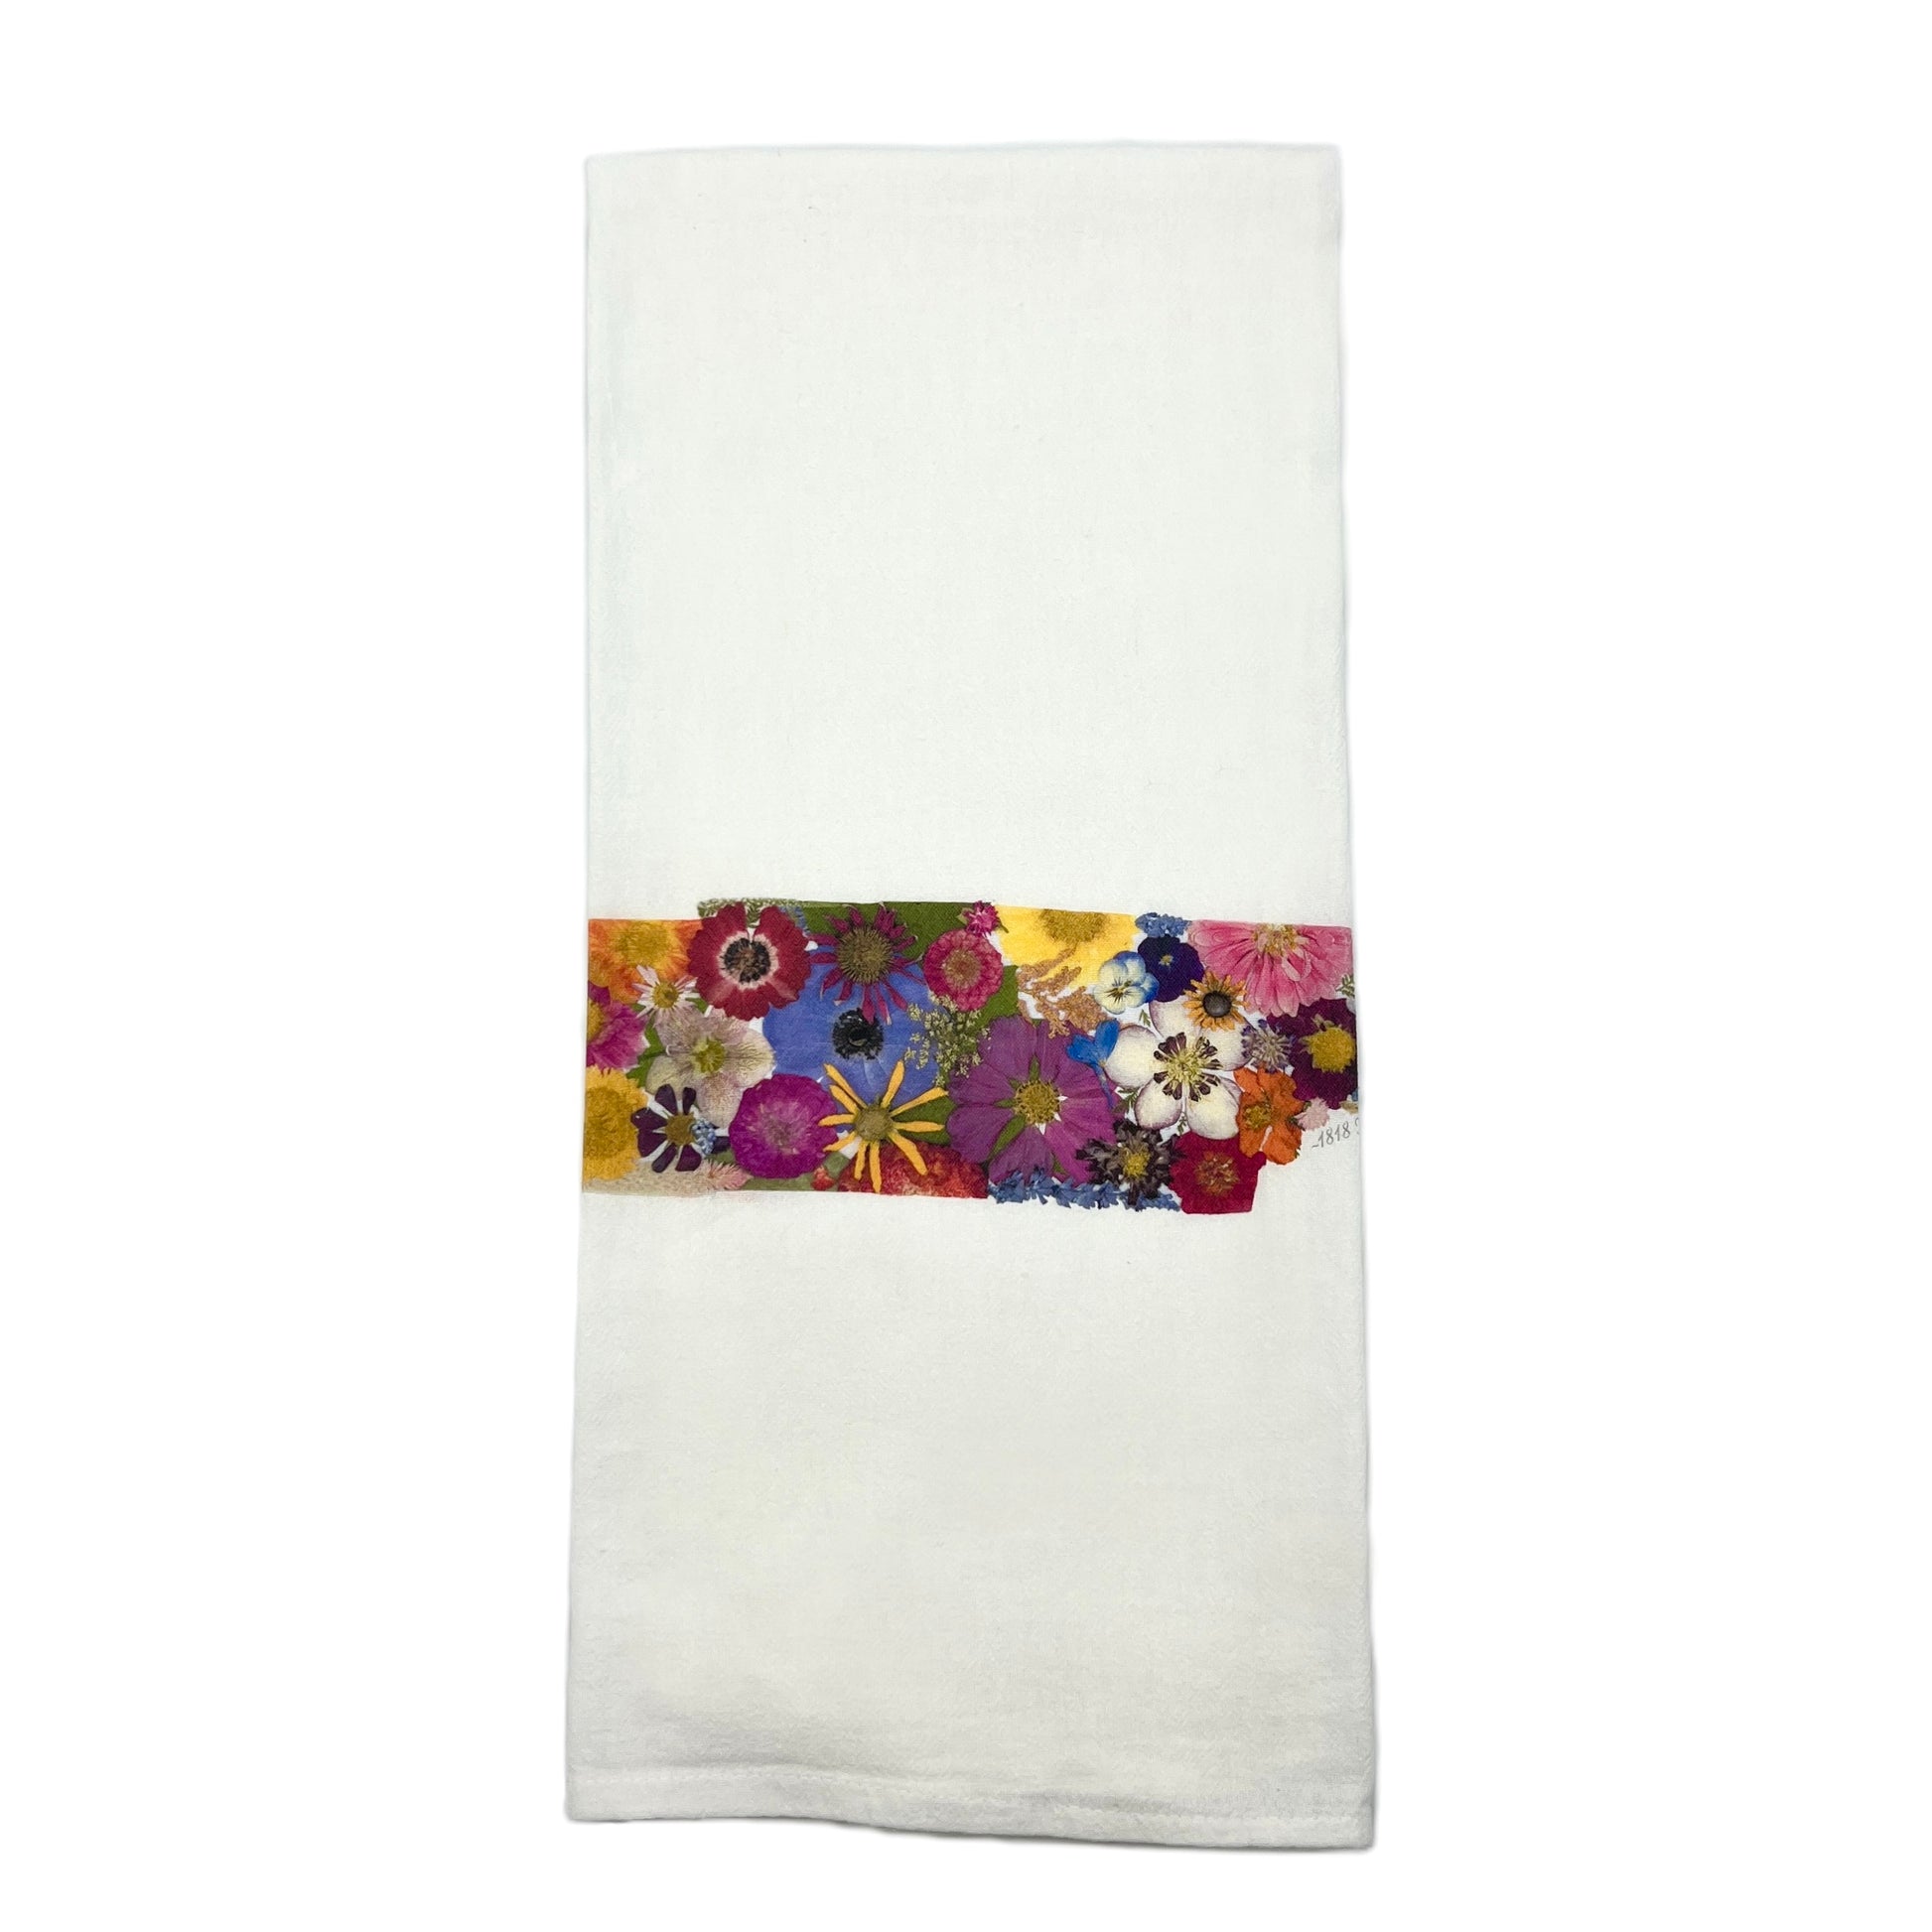 Tennessee Themed Flour Sack Towel  - "Where I Bloom" Collection Towel 1818 Farms   